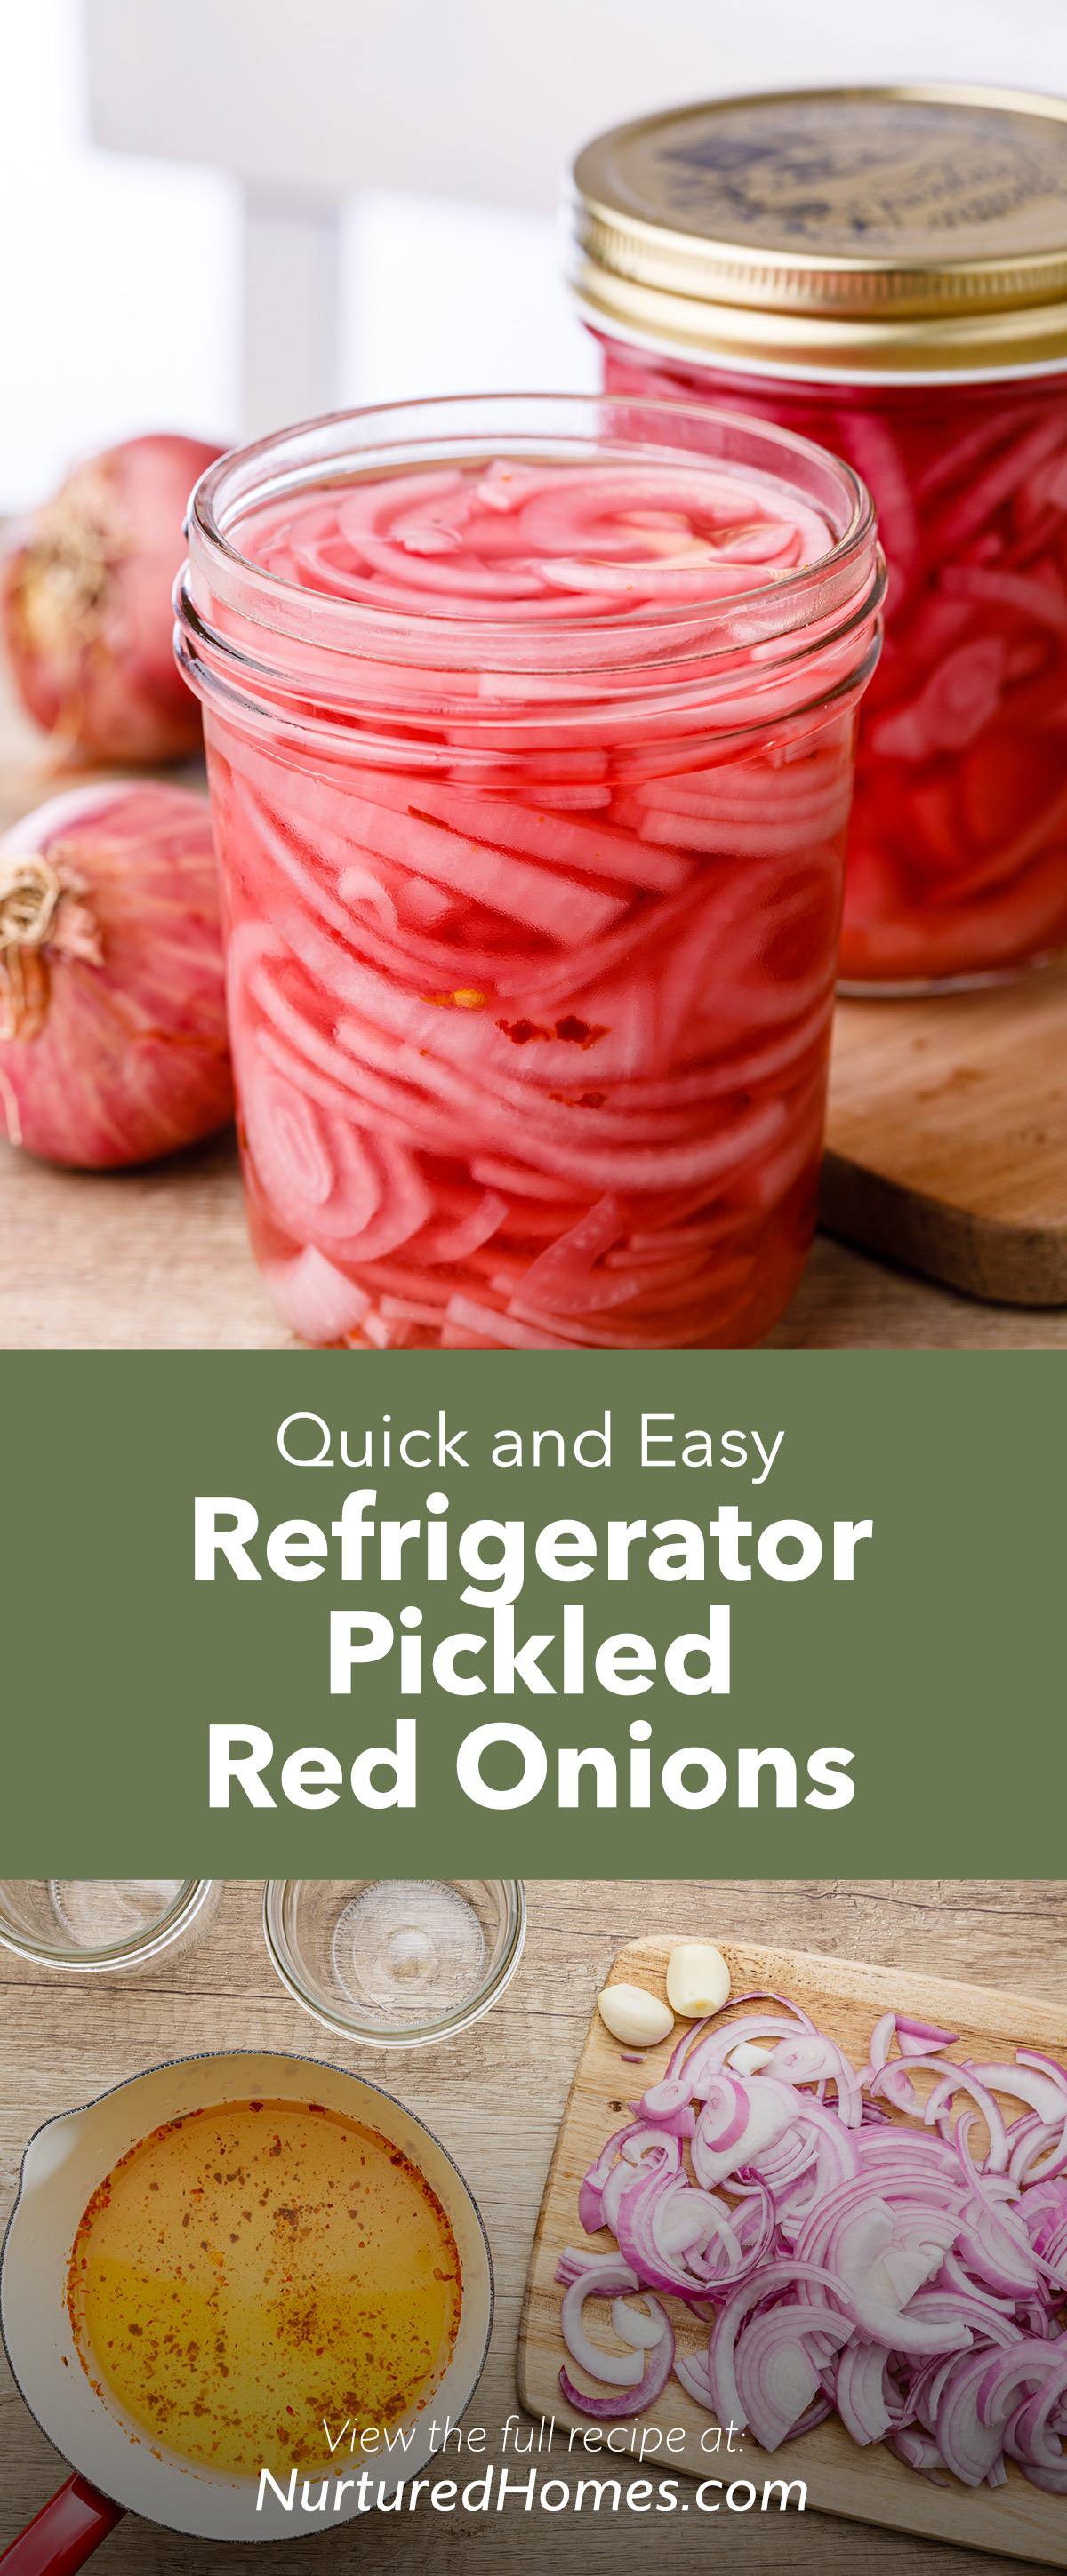 Quick Pickled Red Onions with Apple Cider Vinegar and Garlic